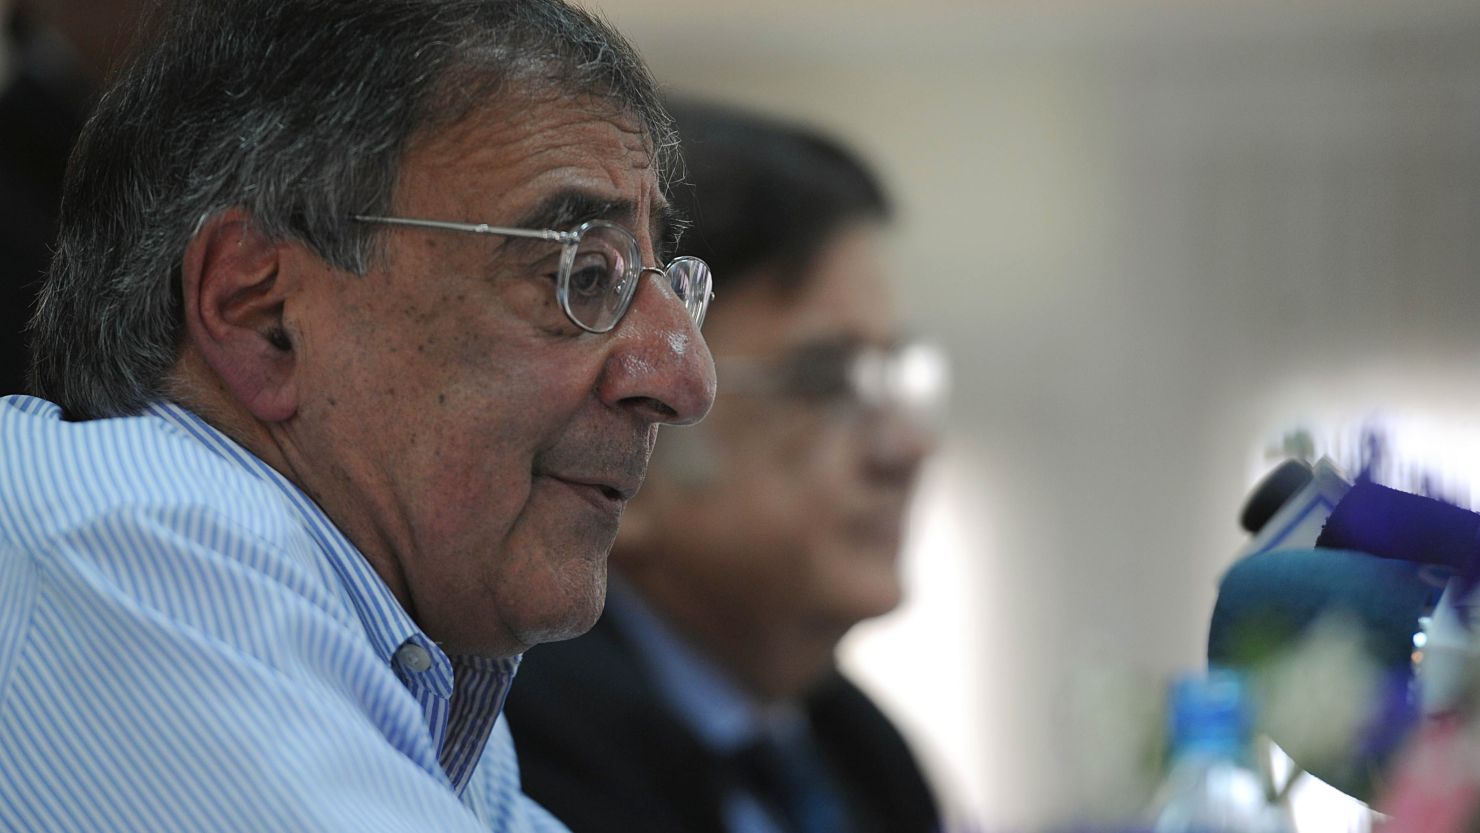 "Anybody who attacks U.S. soldiers is our enemy," Defense Secretary Leon Panetta said Thursday in Kabul.